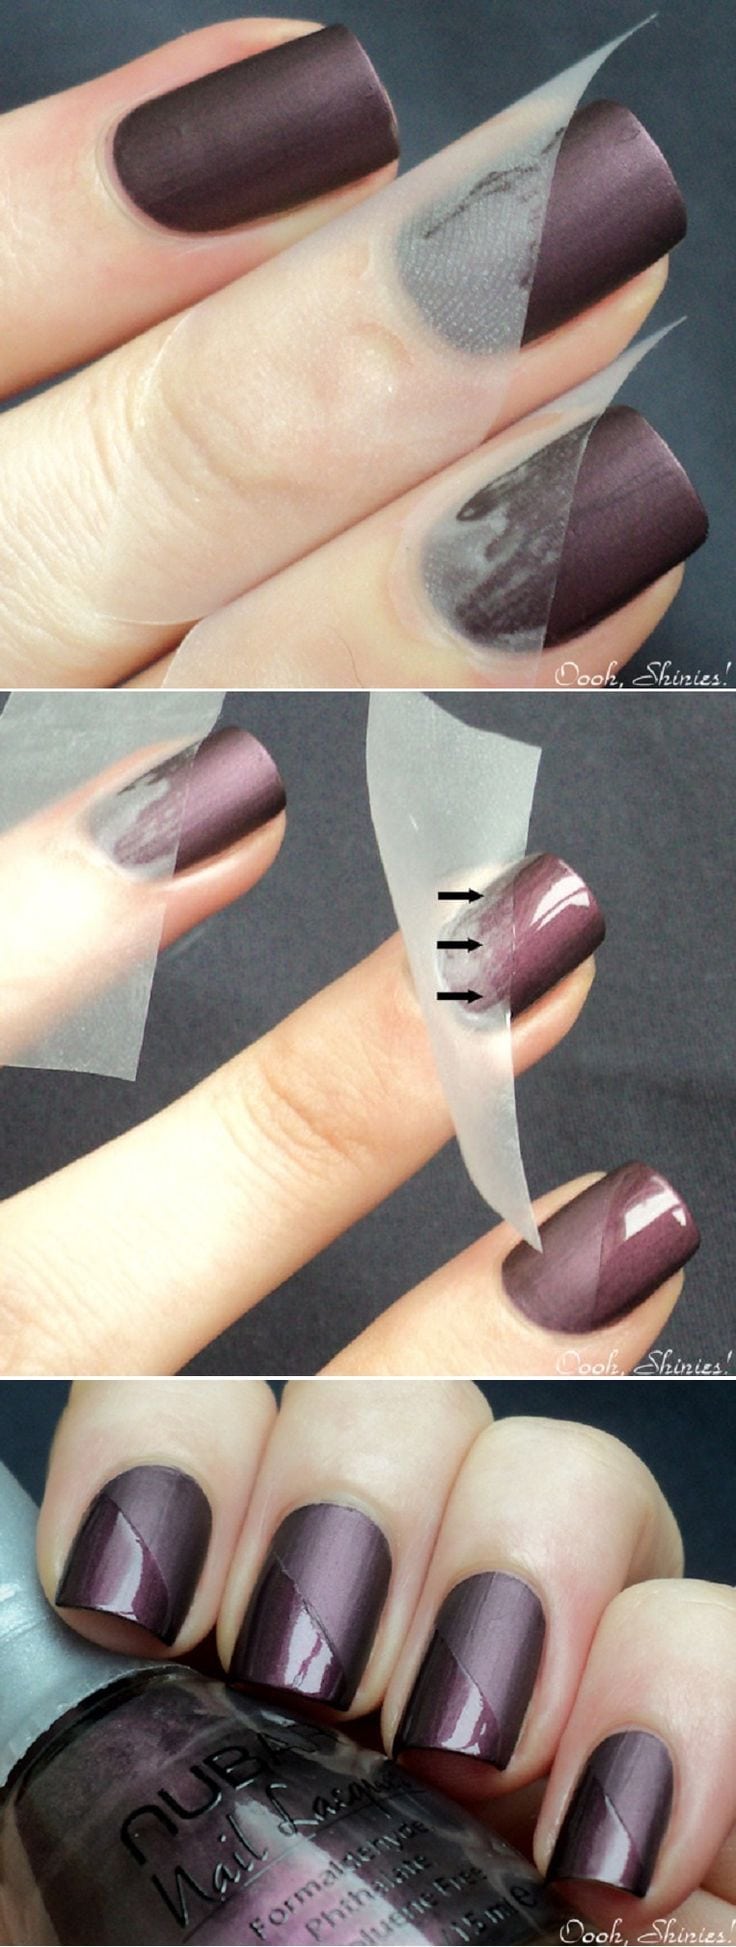 [ad_1]

Taped Mani Tutorial
Source by mgrando
[ad_2]
			
			…